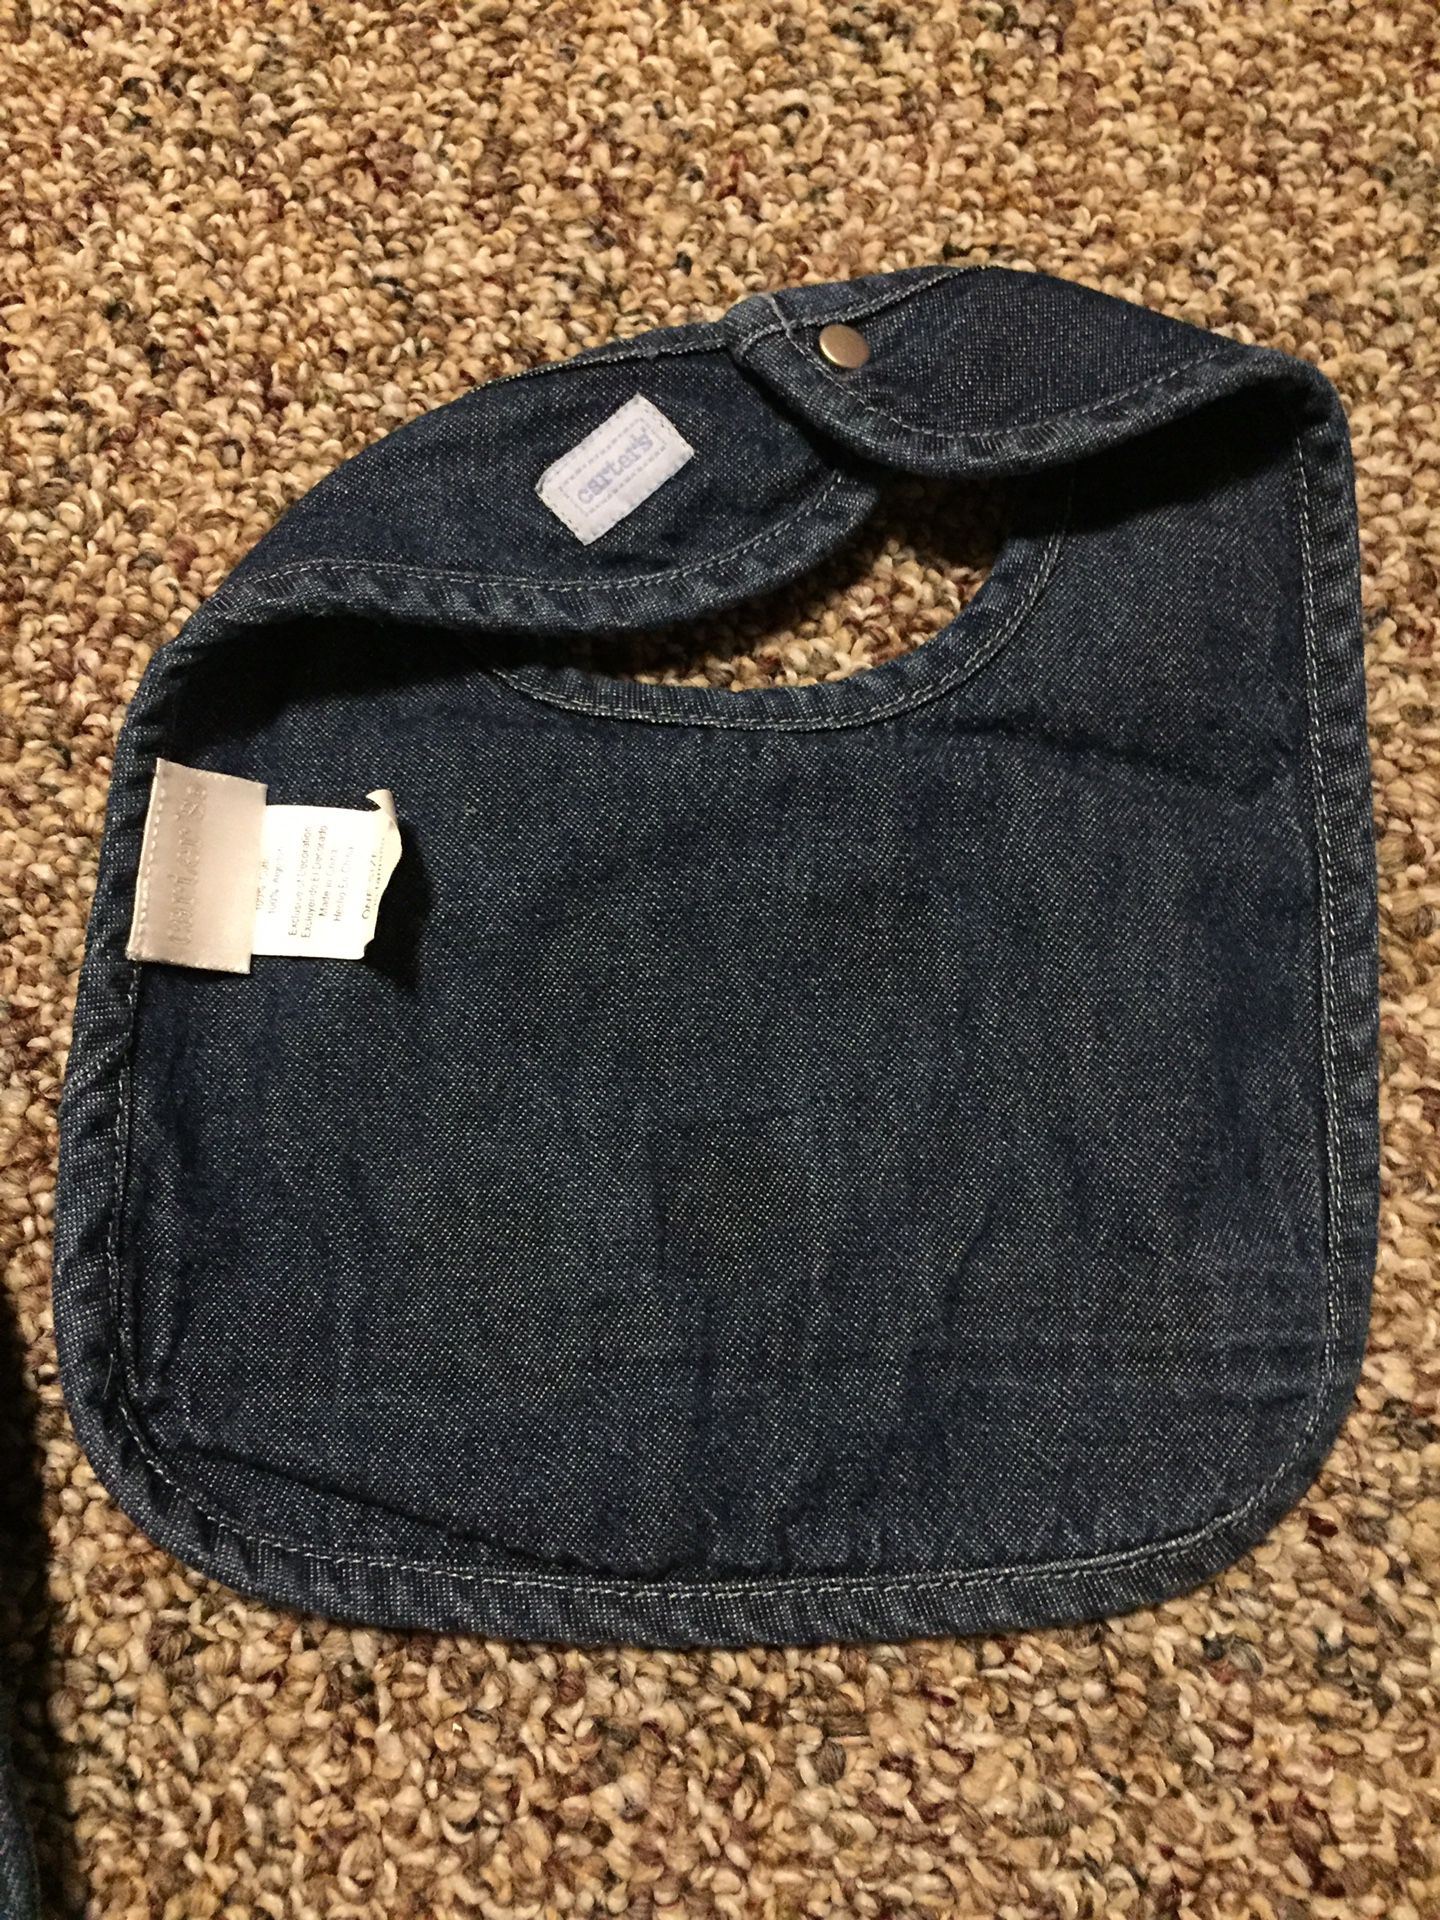 Baby boy carters 3 to 6 months overalls Teddy with matching bib